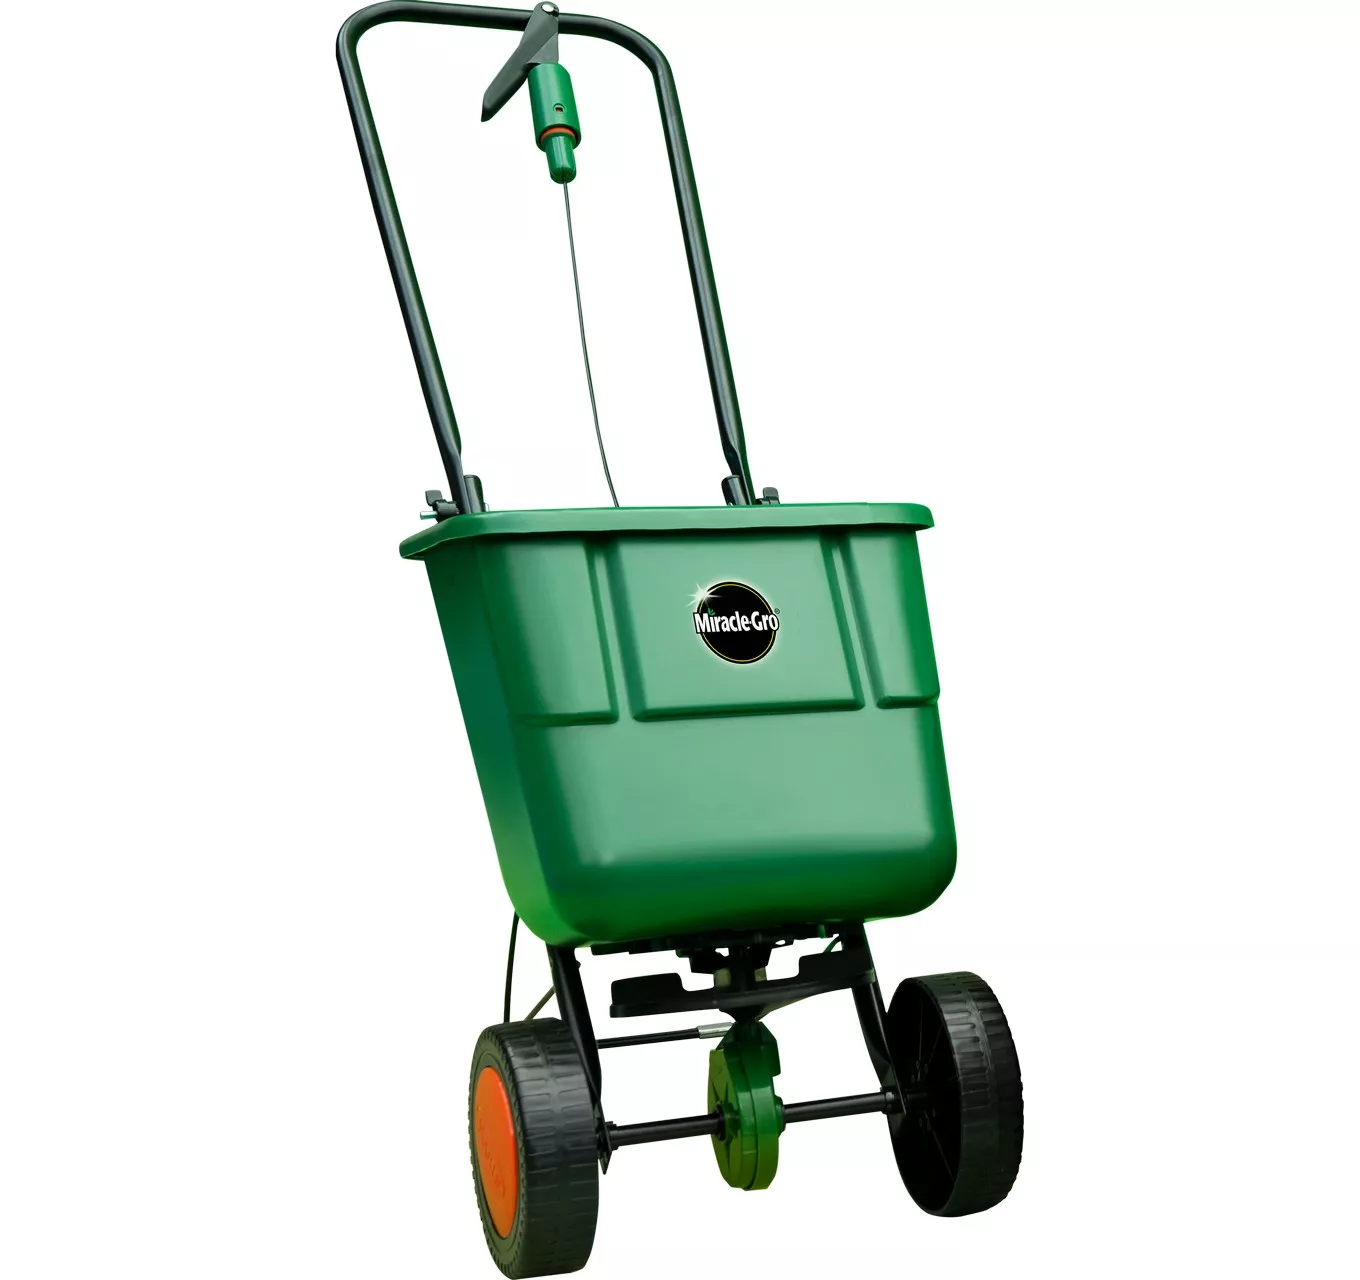 Miracle Gro Rotary Spreader